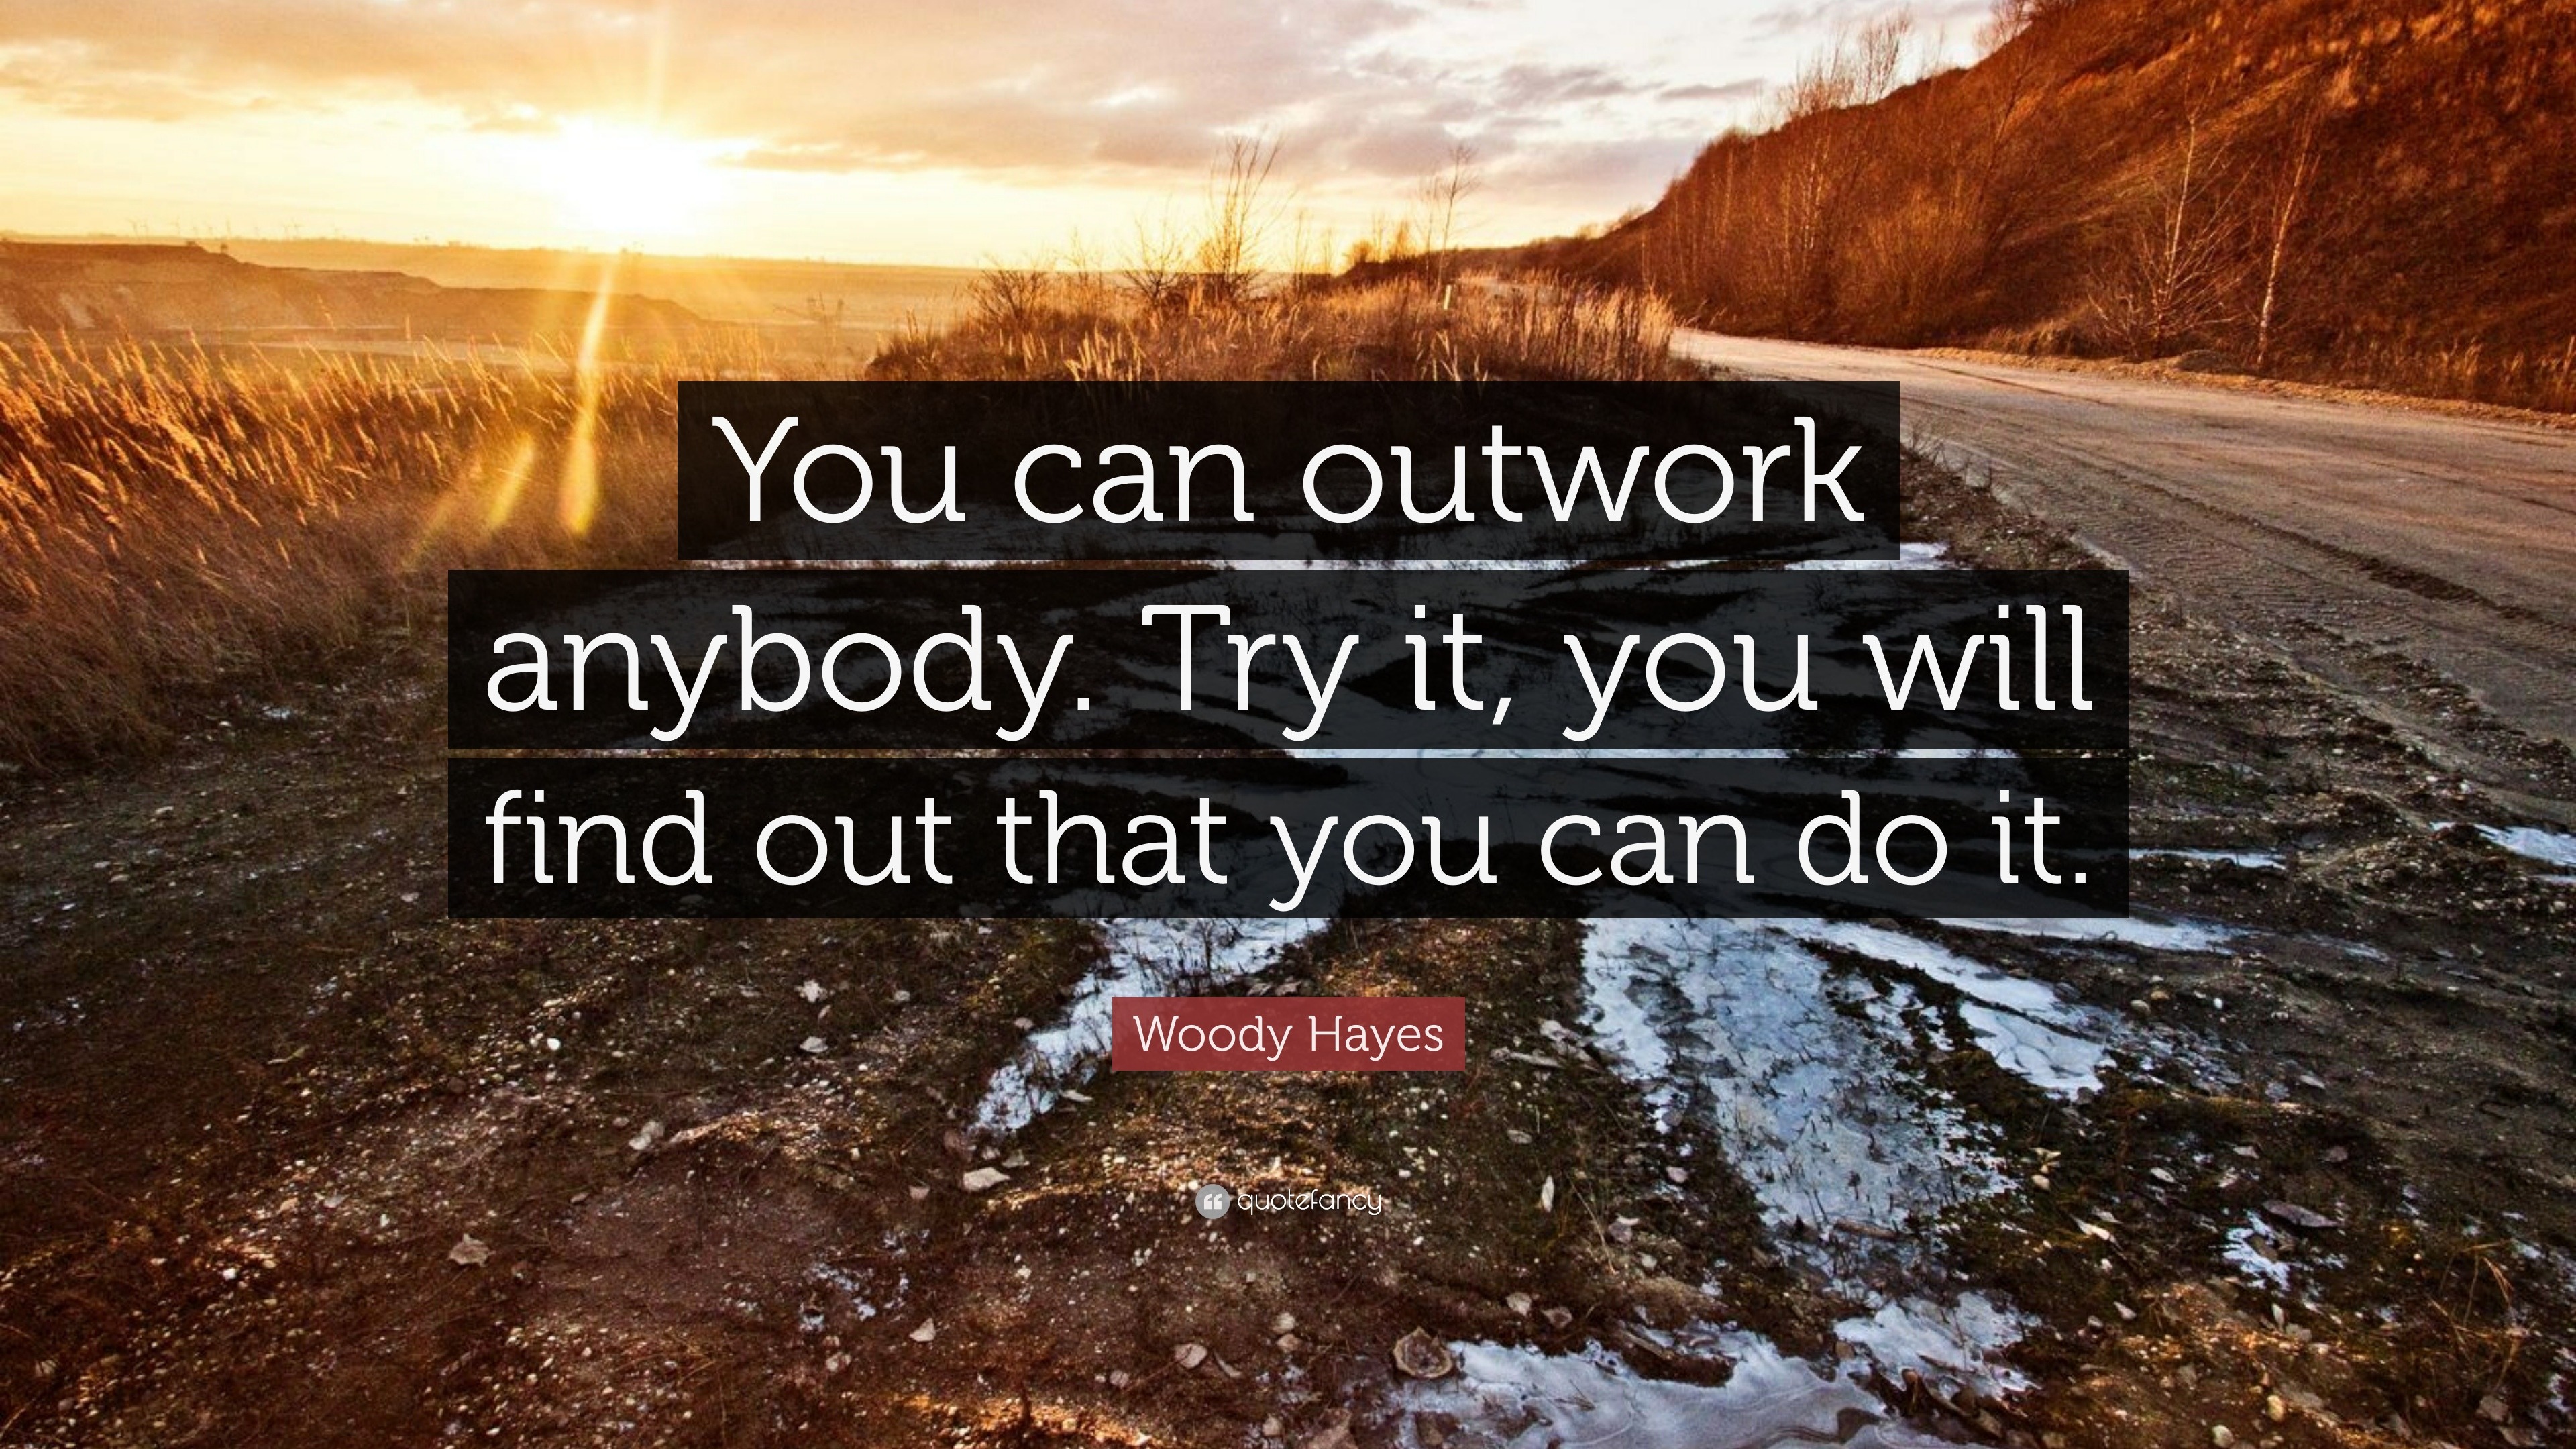 Woody Hayes Quote: “You can outwork anybody. Try it, you will find out ...